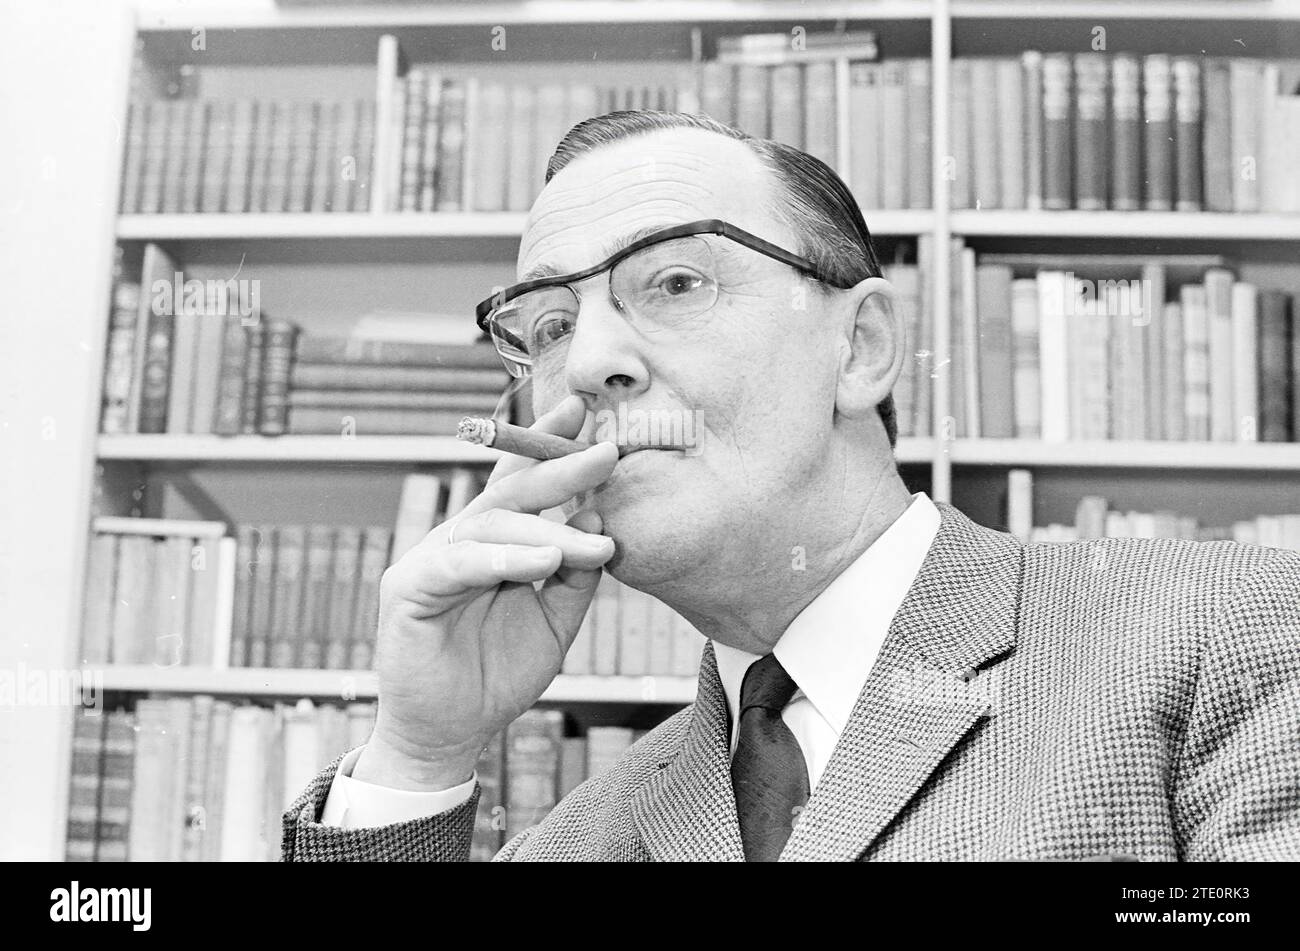 Portrait of Lord Monte, Portraits, 14-11-1969, Whizgle News from the Past, Tailored for the Future. Explore historical narratives, Dutch The Netherlands agency image with a modern perspective, bridging the gap between yesterday's events and tomorrow's insights. A timeless journey shaping the stories that shape our future. Stock Photo